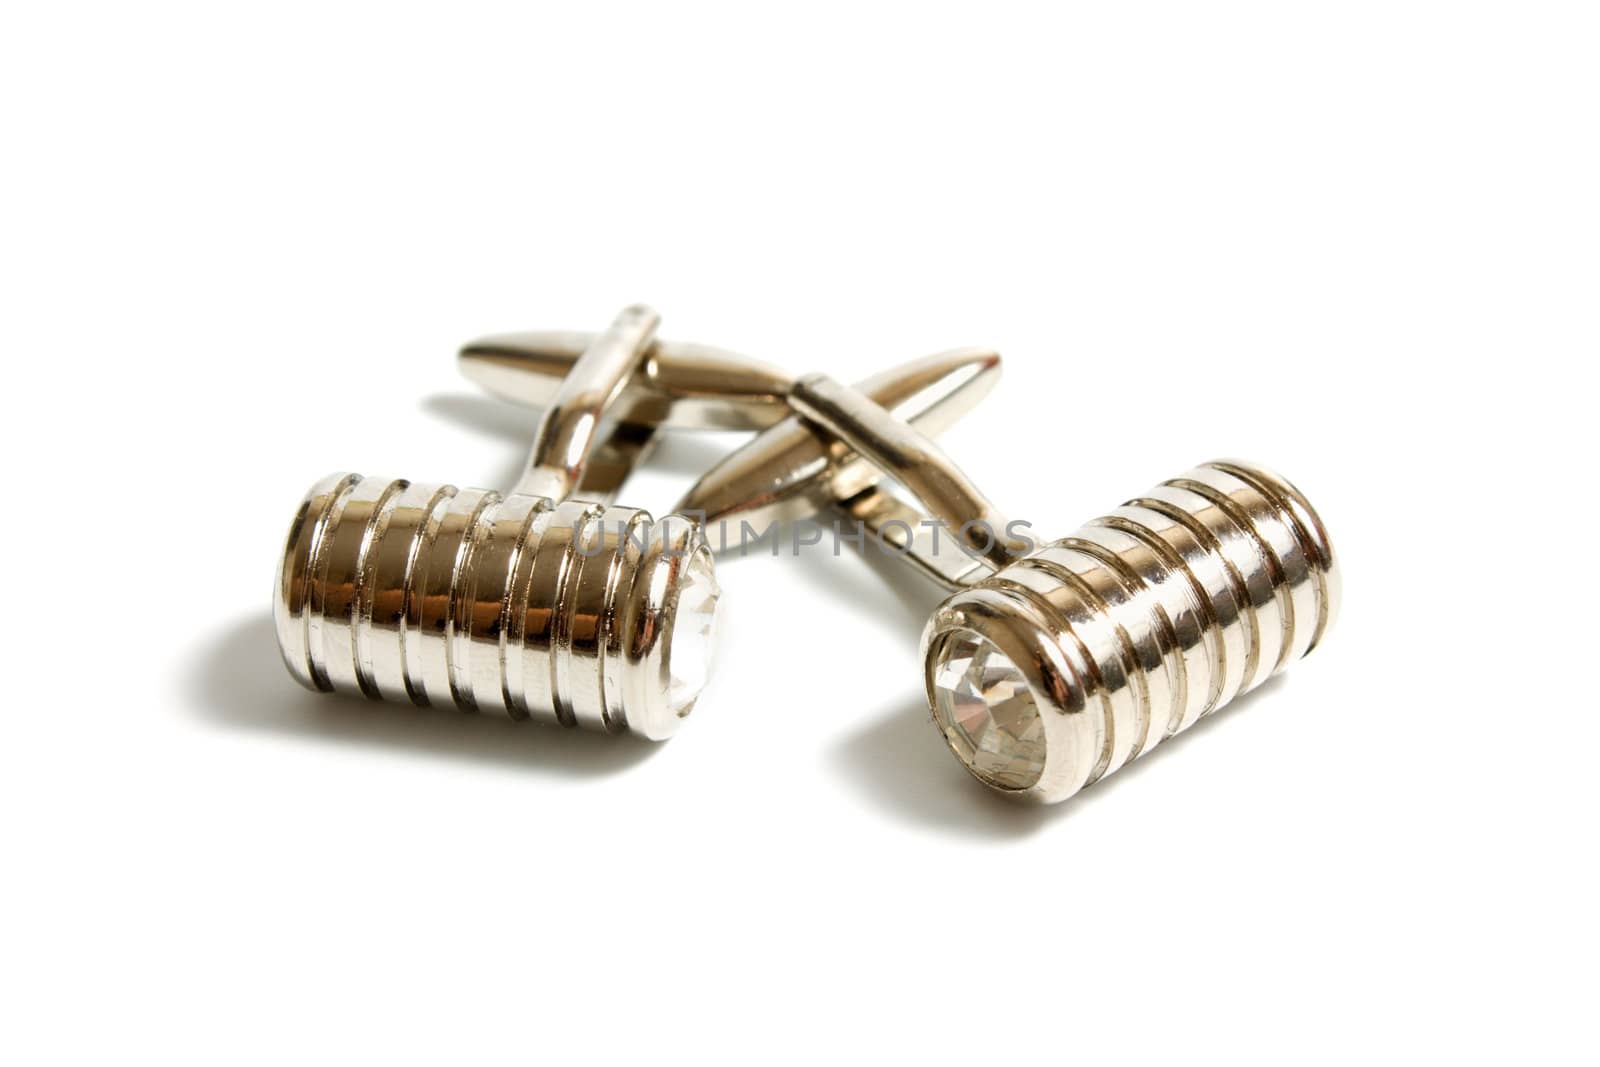 a pair of stainless steel cufflinks on white